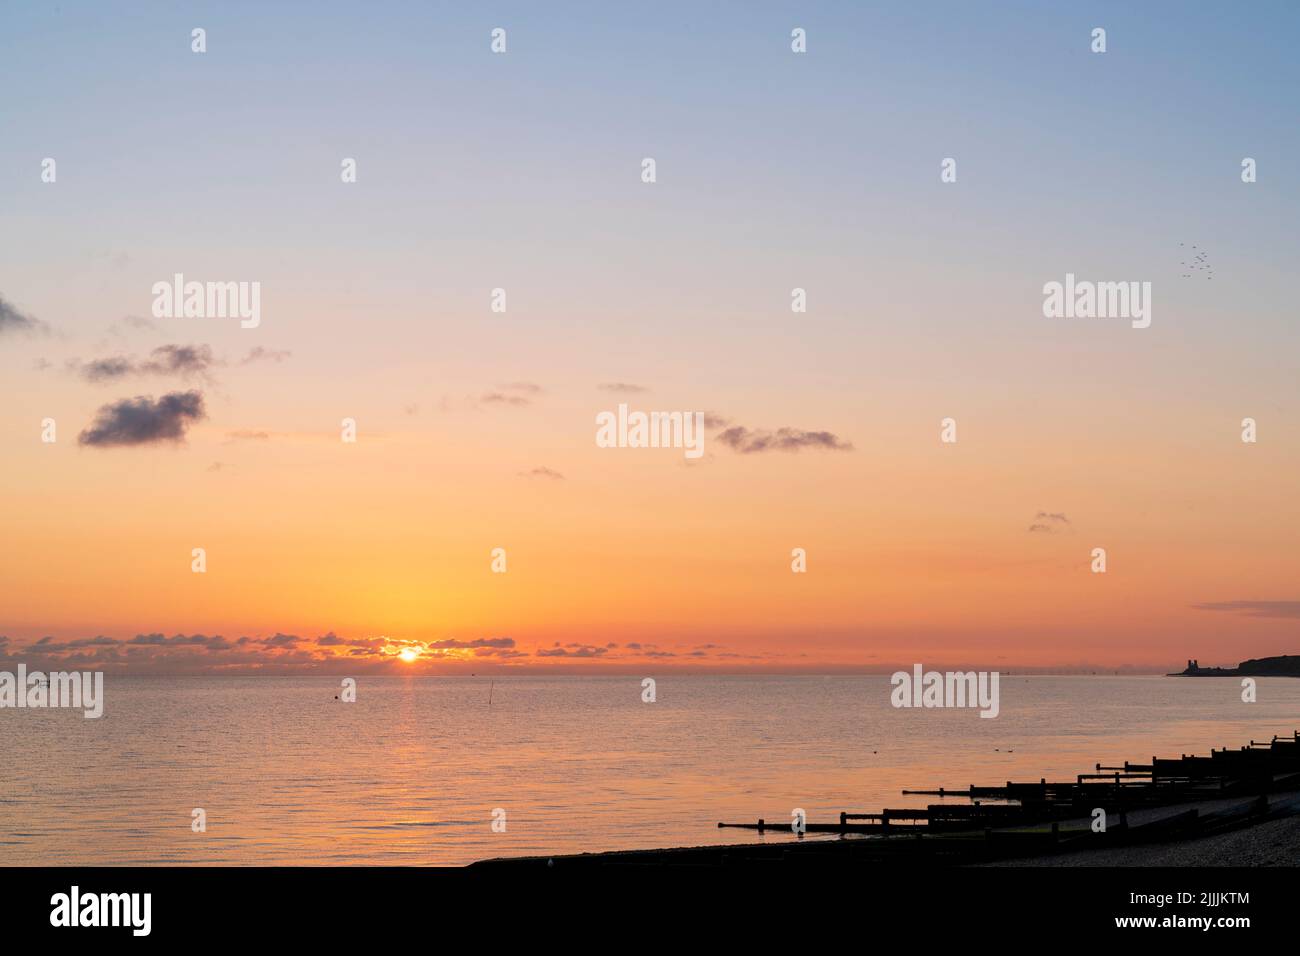 Herne Bay, Kent. 27/07/22. The sunrise over the North Sea seen from the seafront at the resort town of Herne Bay. A mostly clear sky promising sunshine and warm temperatures for the day. Credit-Malcolm Fairman, Alamy Live News. Stock Photo